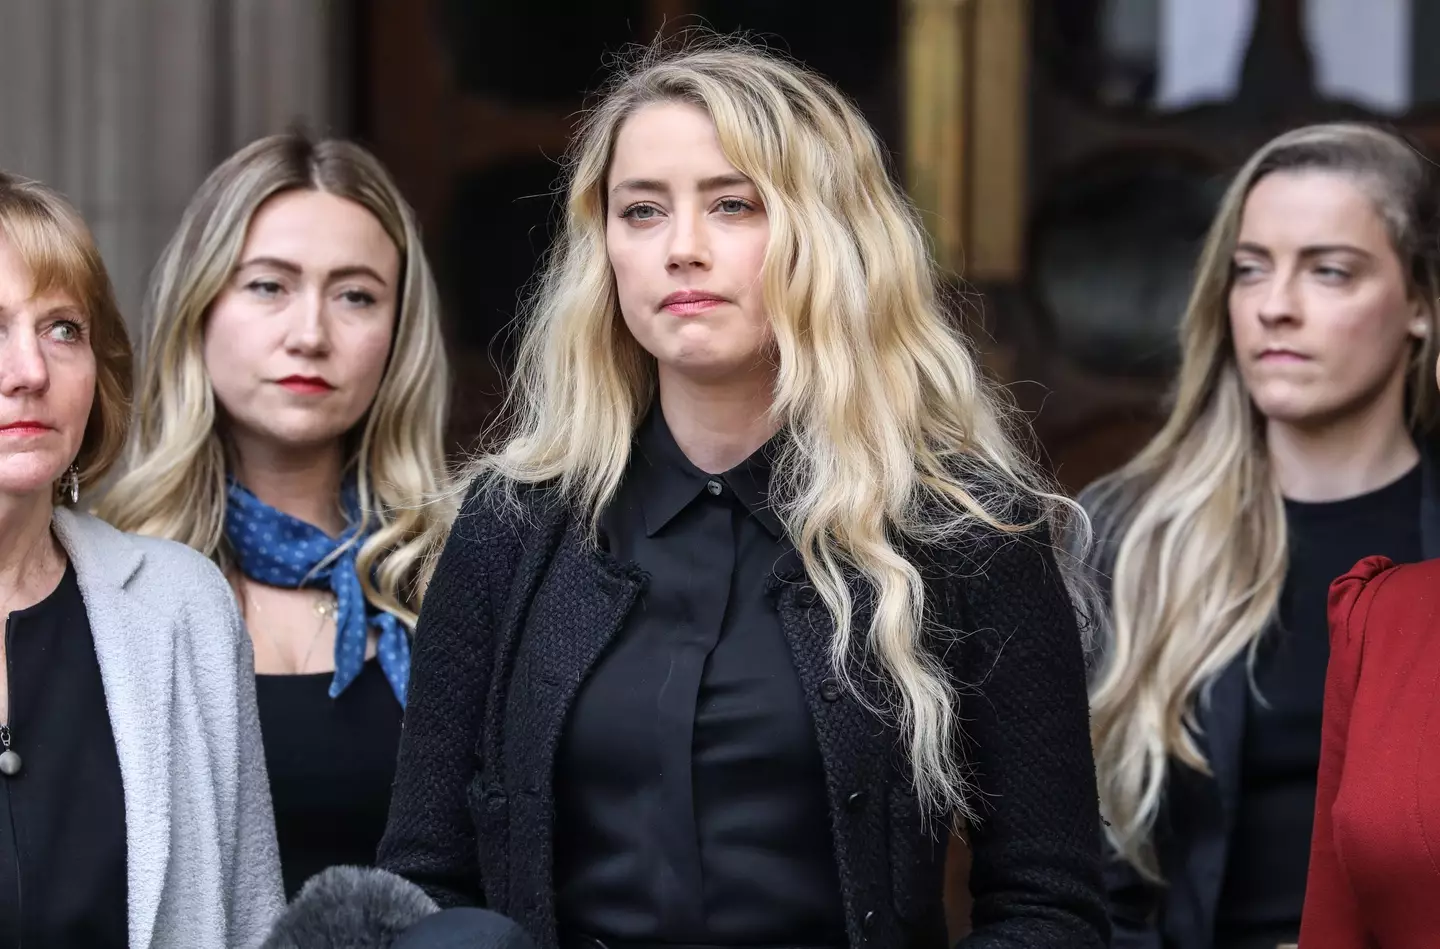 Amber Heard speaks out on social media for last time before the defamation trial between her and ex-husband Johnny Depp begins.